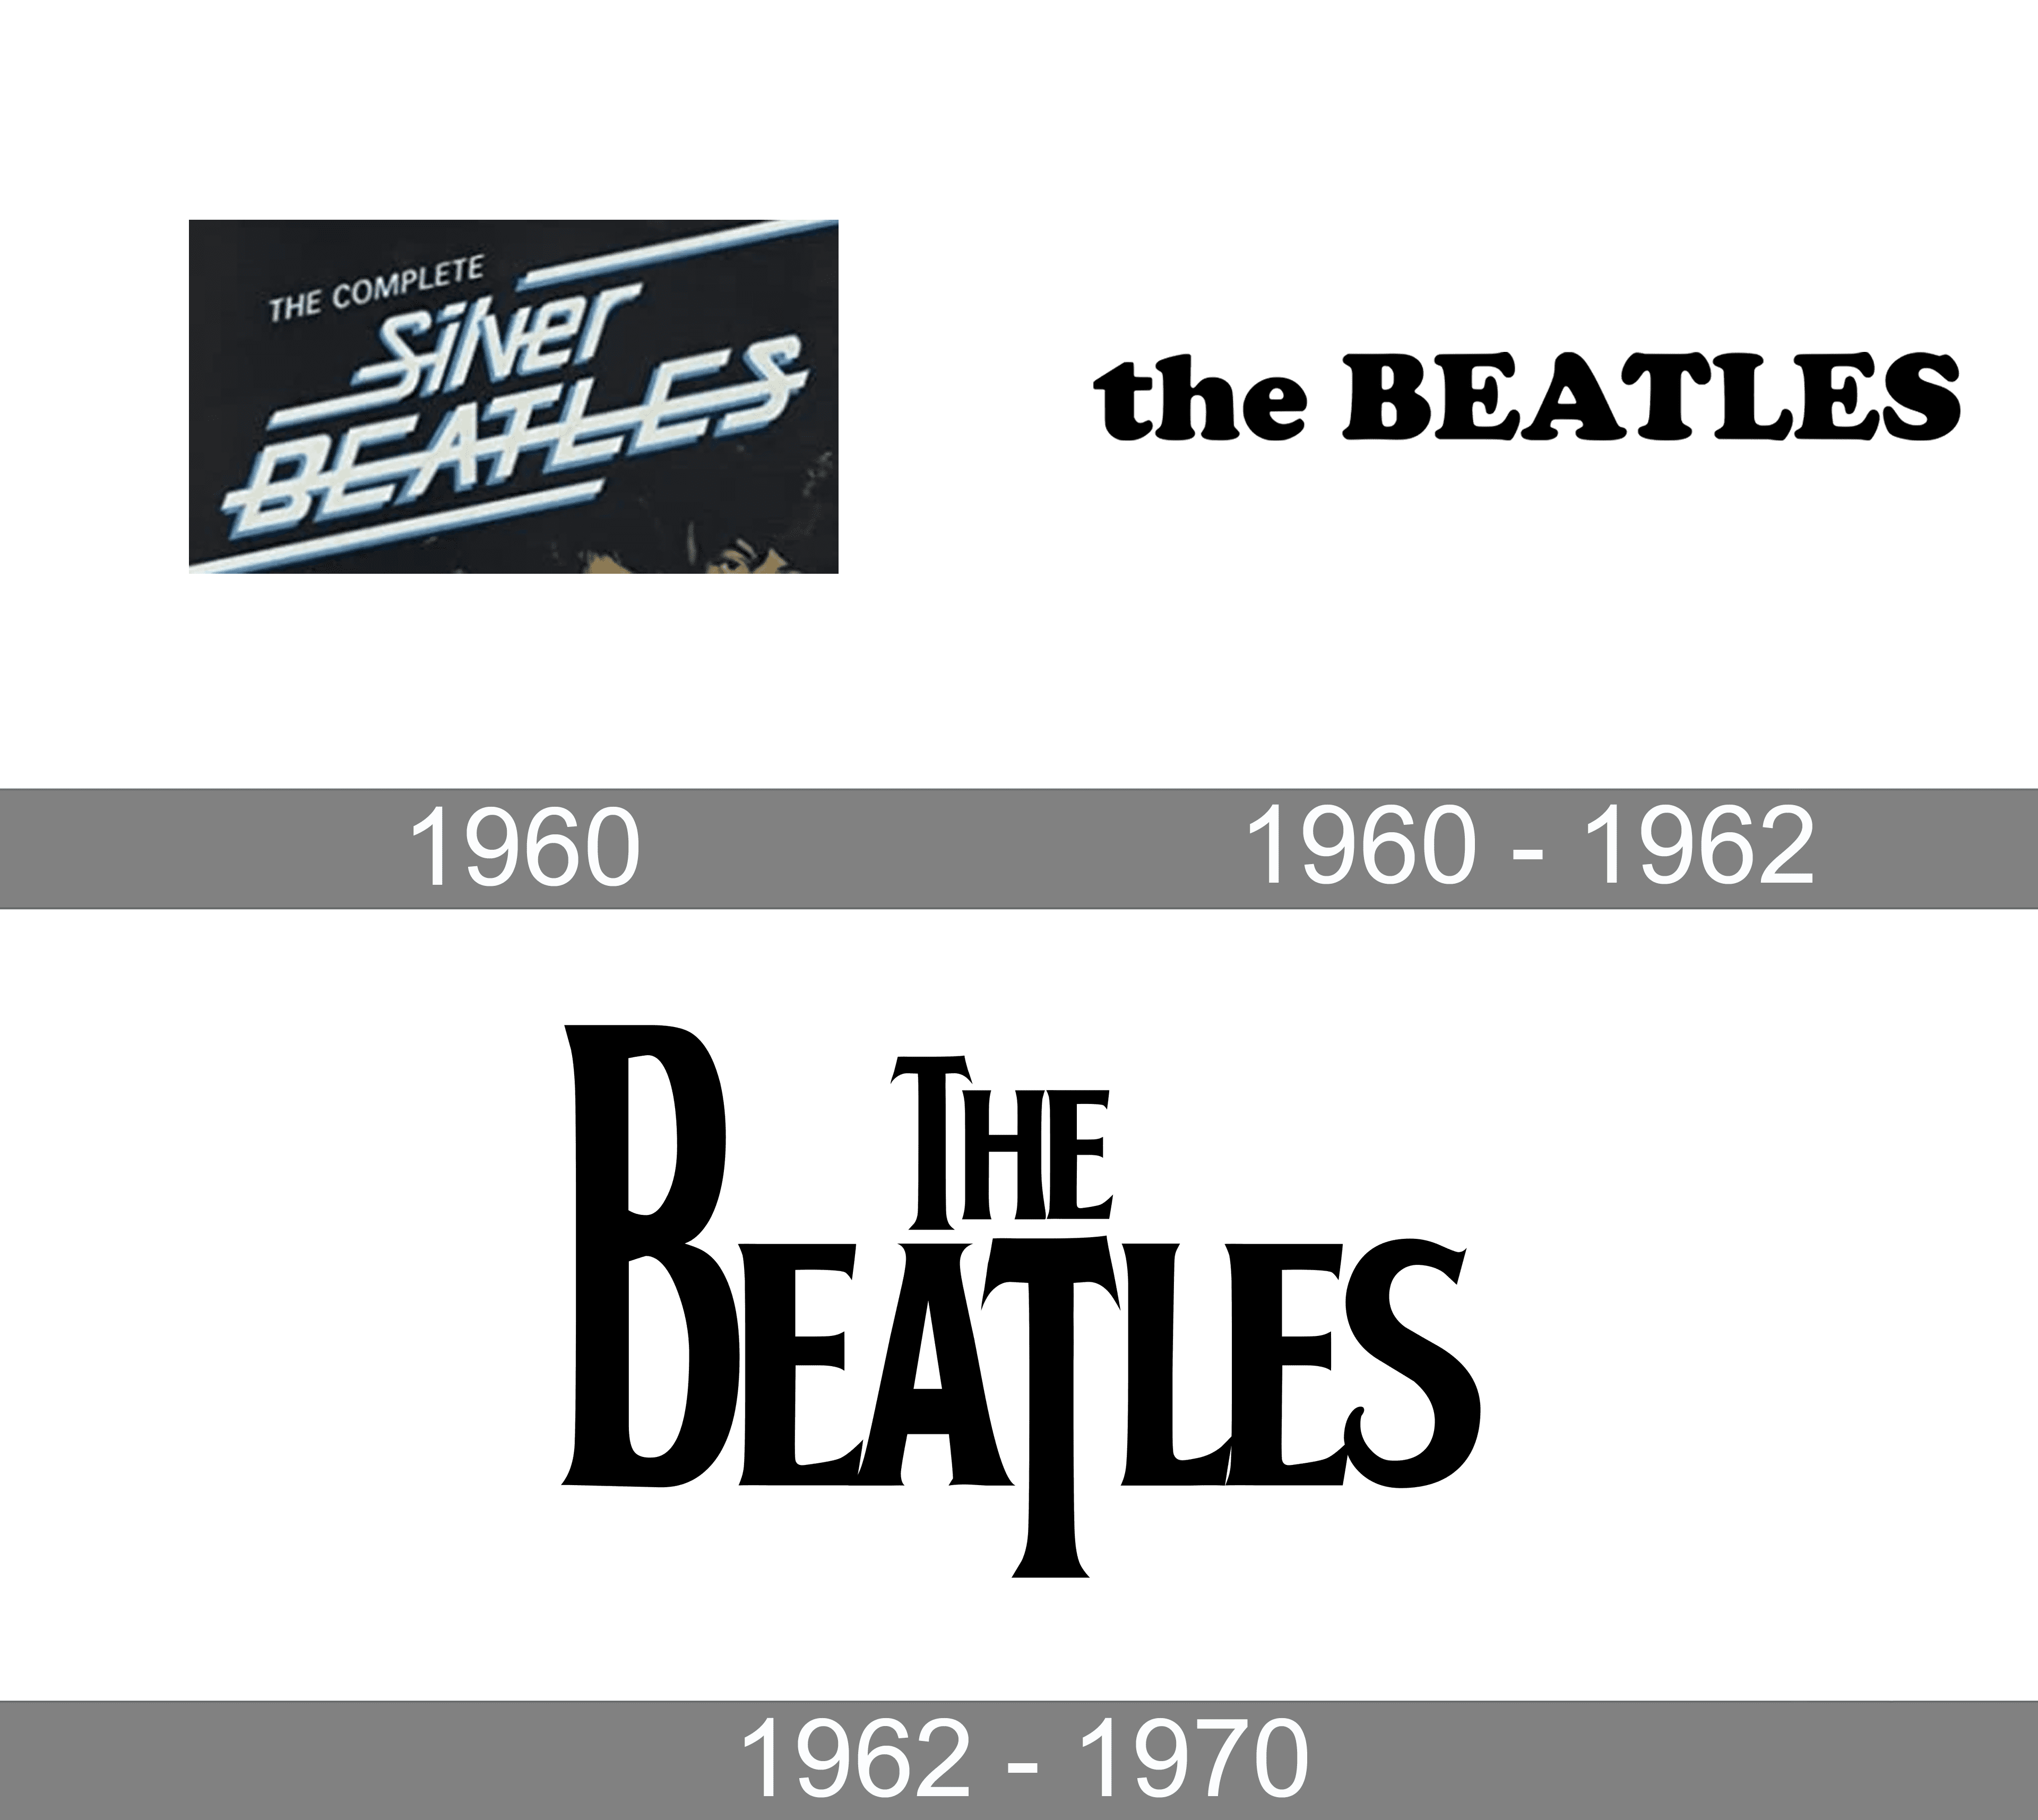 The earliest Beatles logo sketches have been revealed | Creative Bloq